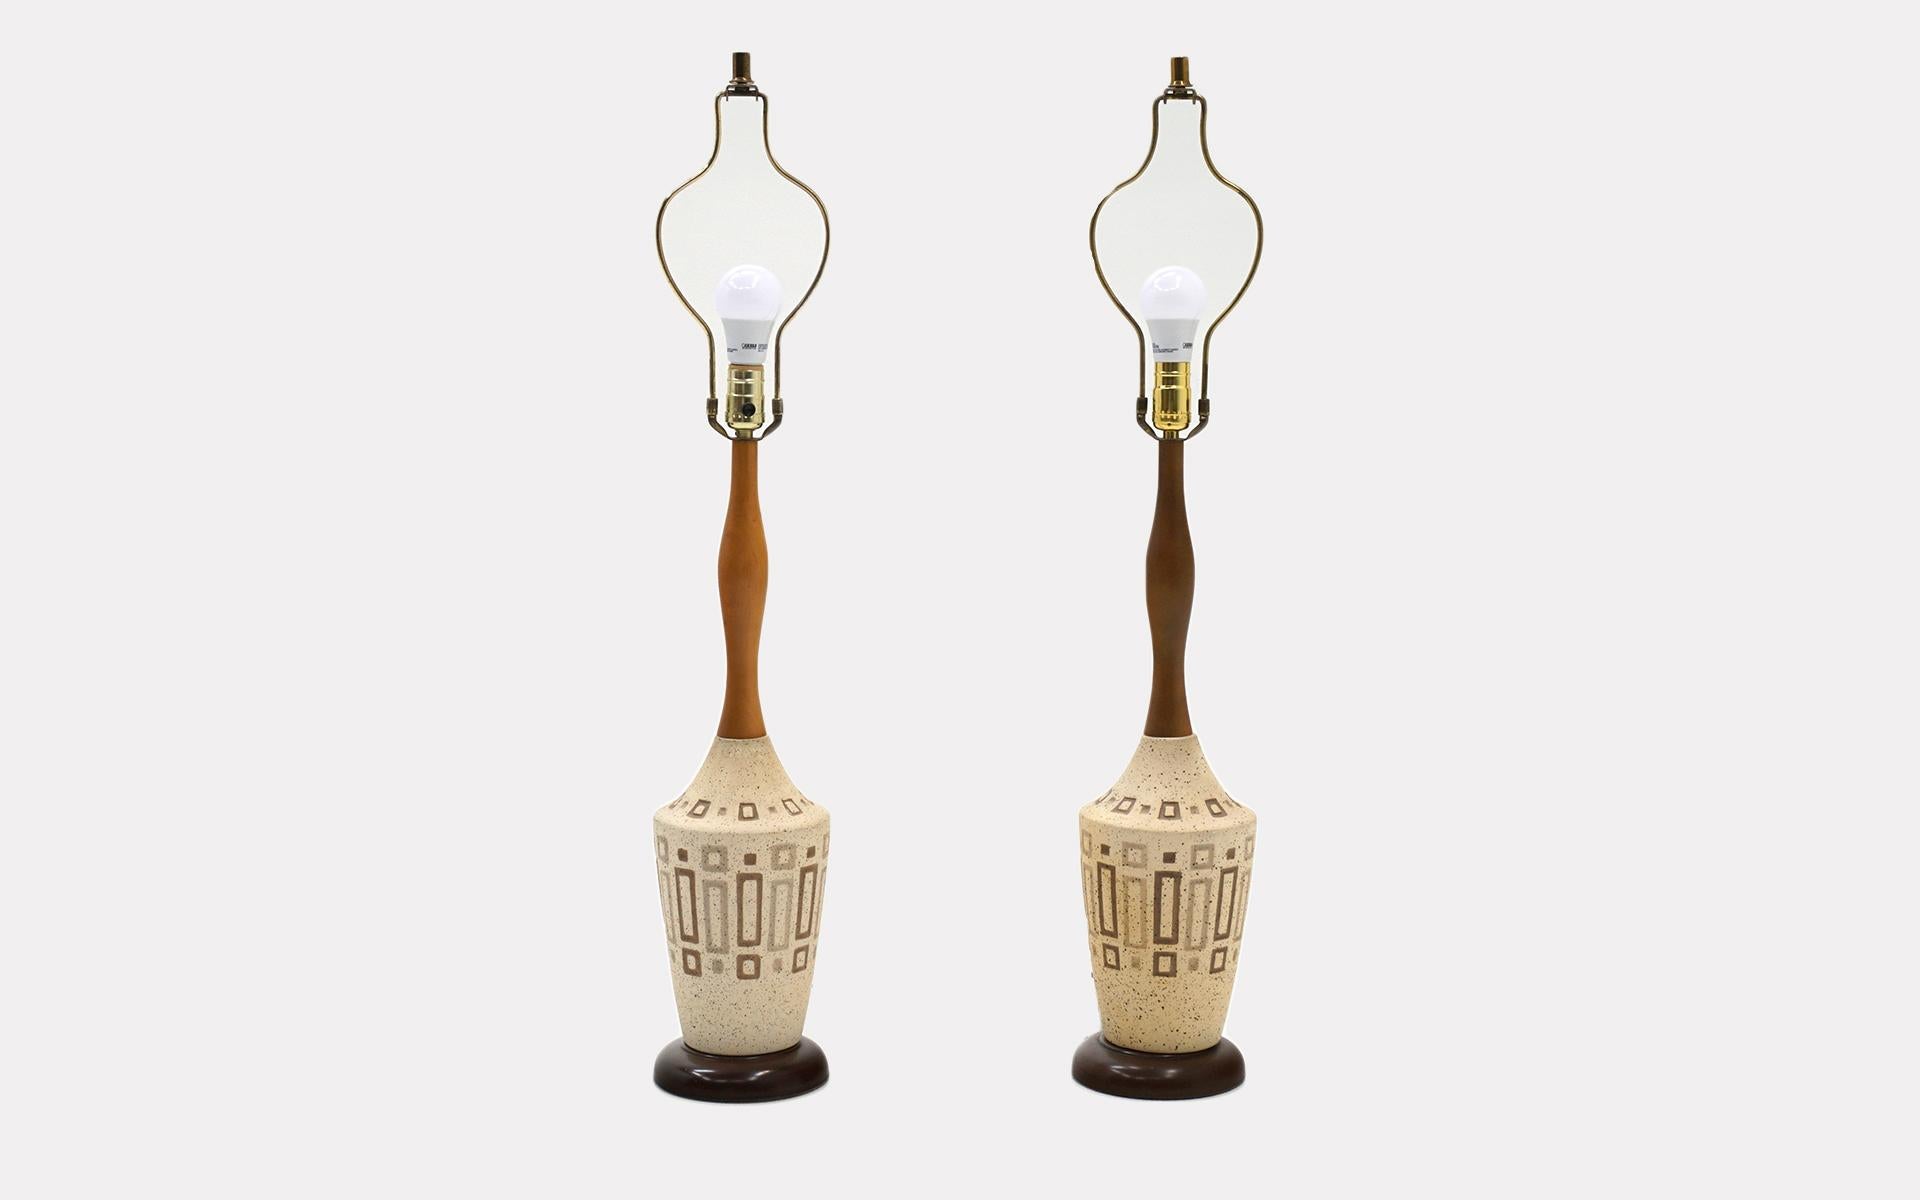 Pair of midcentury table lamps with ceramic bases and a sculptural walnut stem. Both lamps retain the original finials and shades.